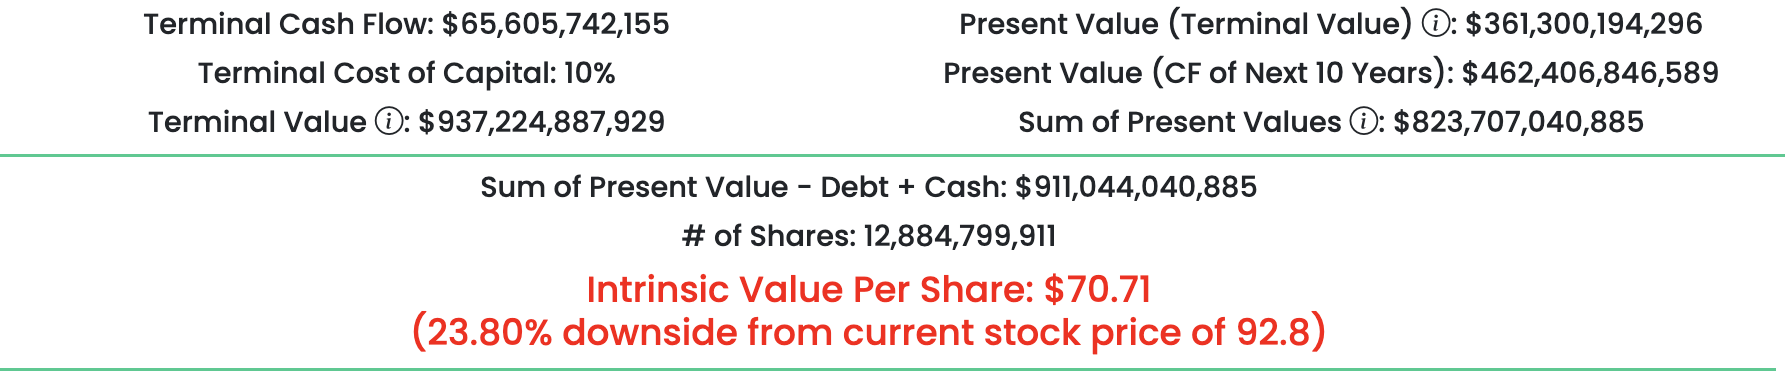 Picture showing the intrinsic value calculated for Alphabet (GOOG) for our less optimistic case.